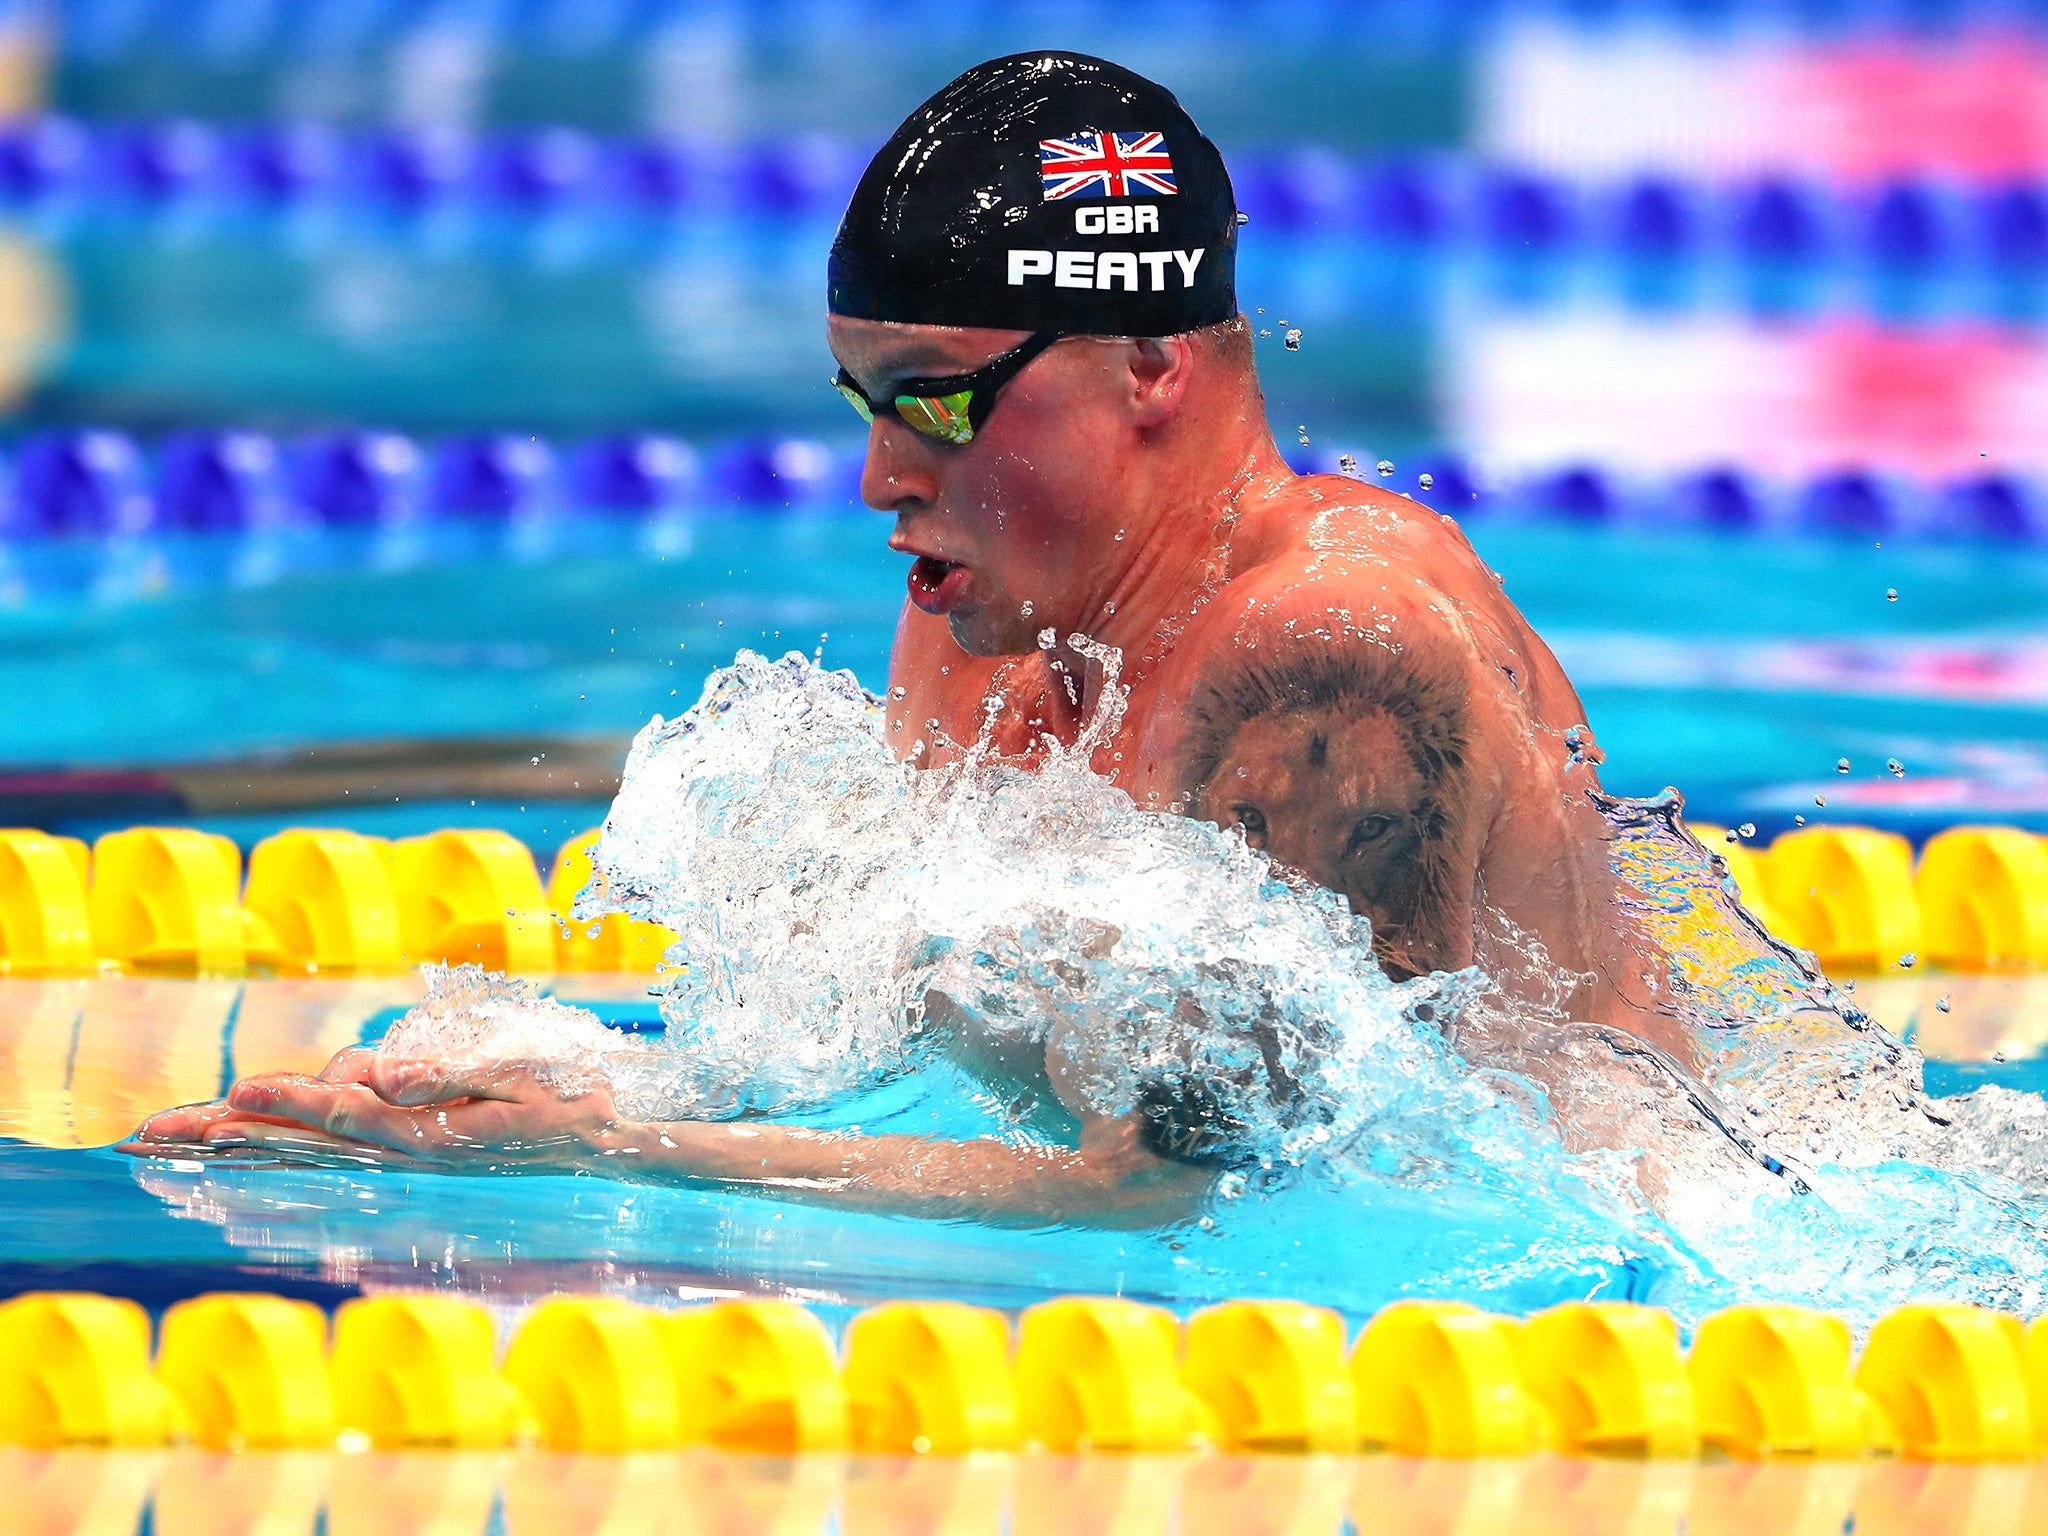 Peaty defended his 50m breaststroke title in a stunning display